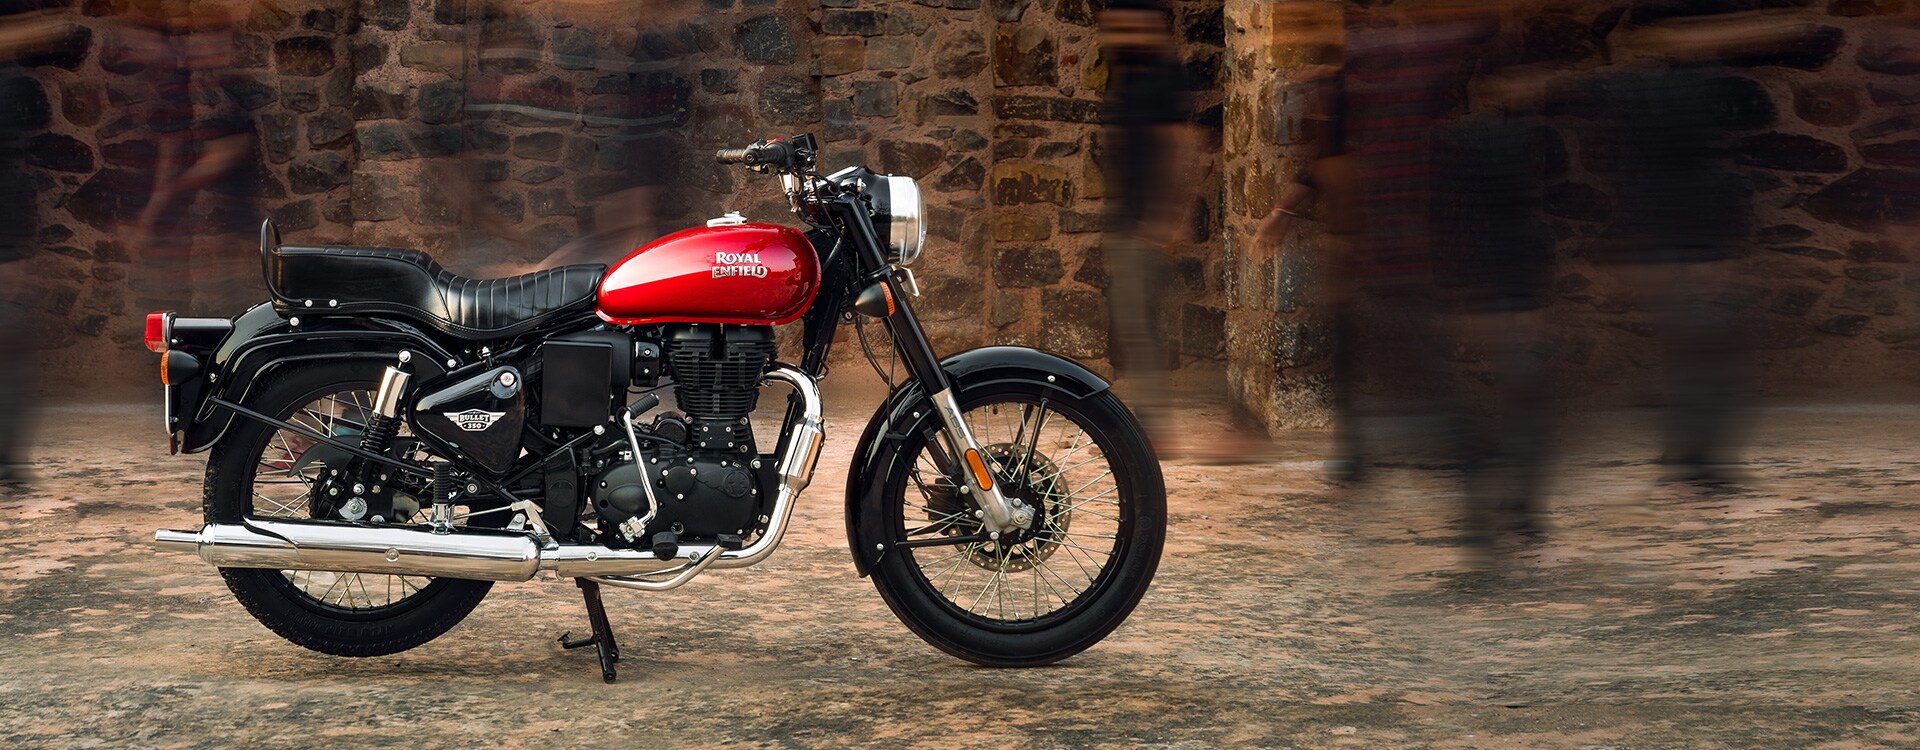 RE Bullet 350 ES Price, Colours, Images & Mileage in India | Royal Enfield